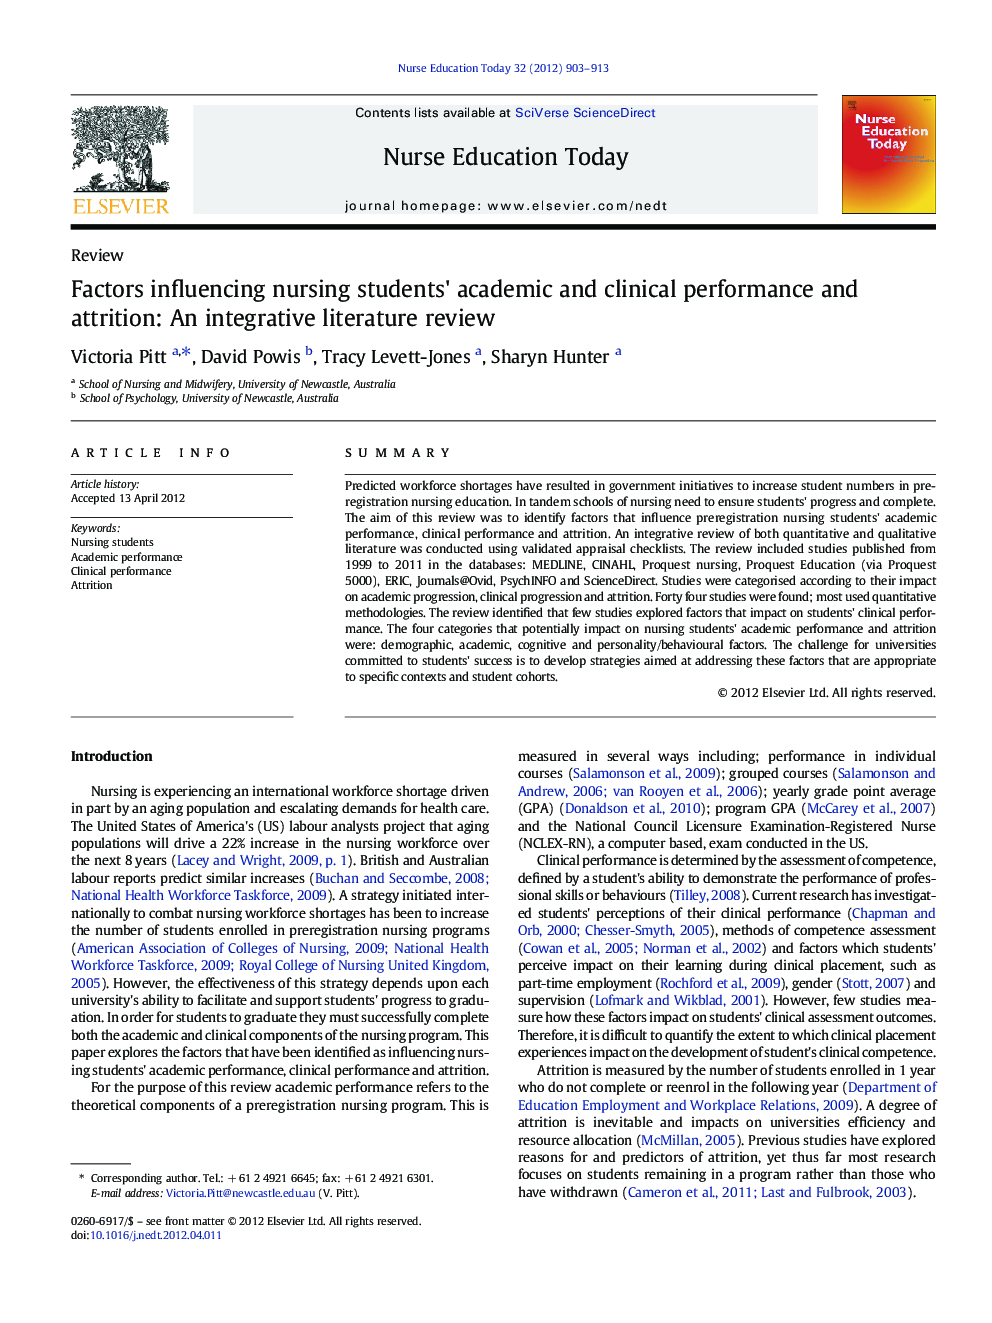 Factors influencing nursing students' academic and clinical performance and attrition: An integrative literature review